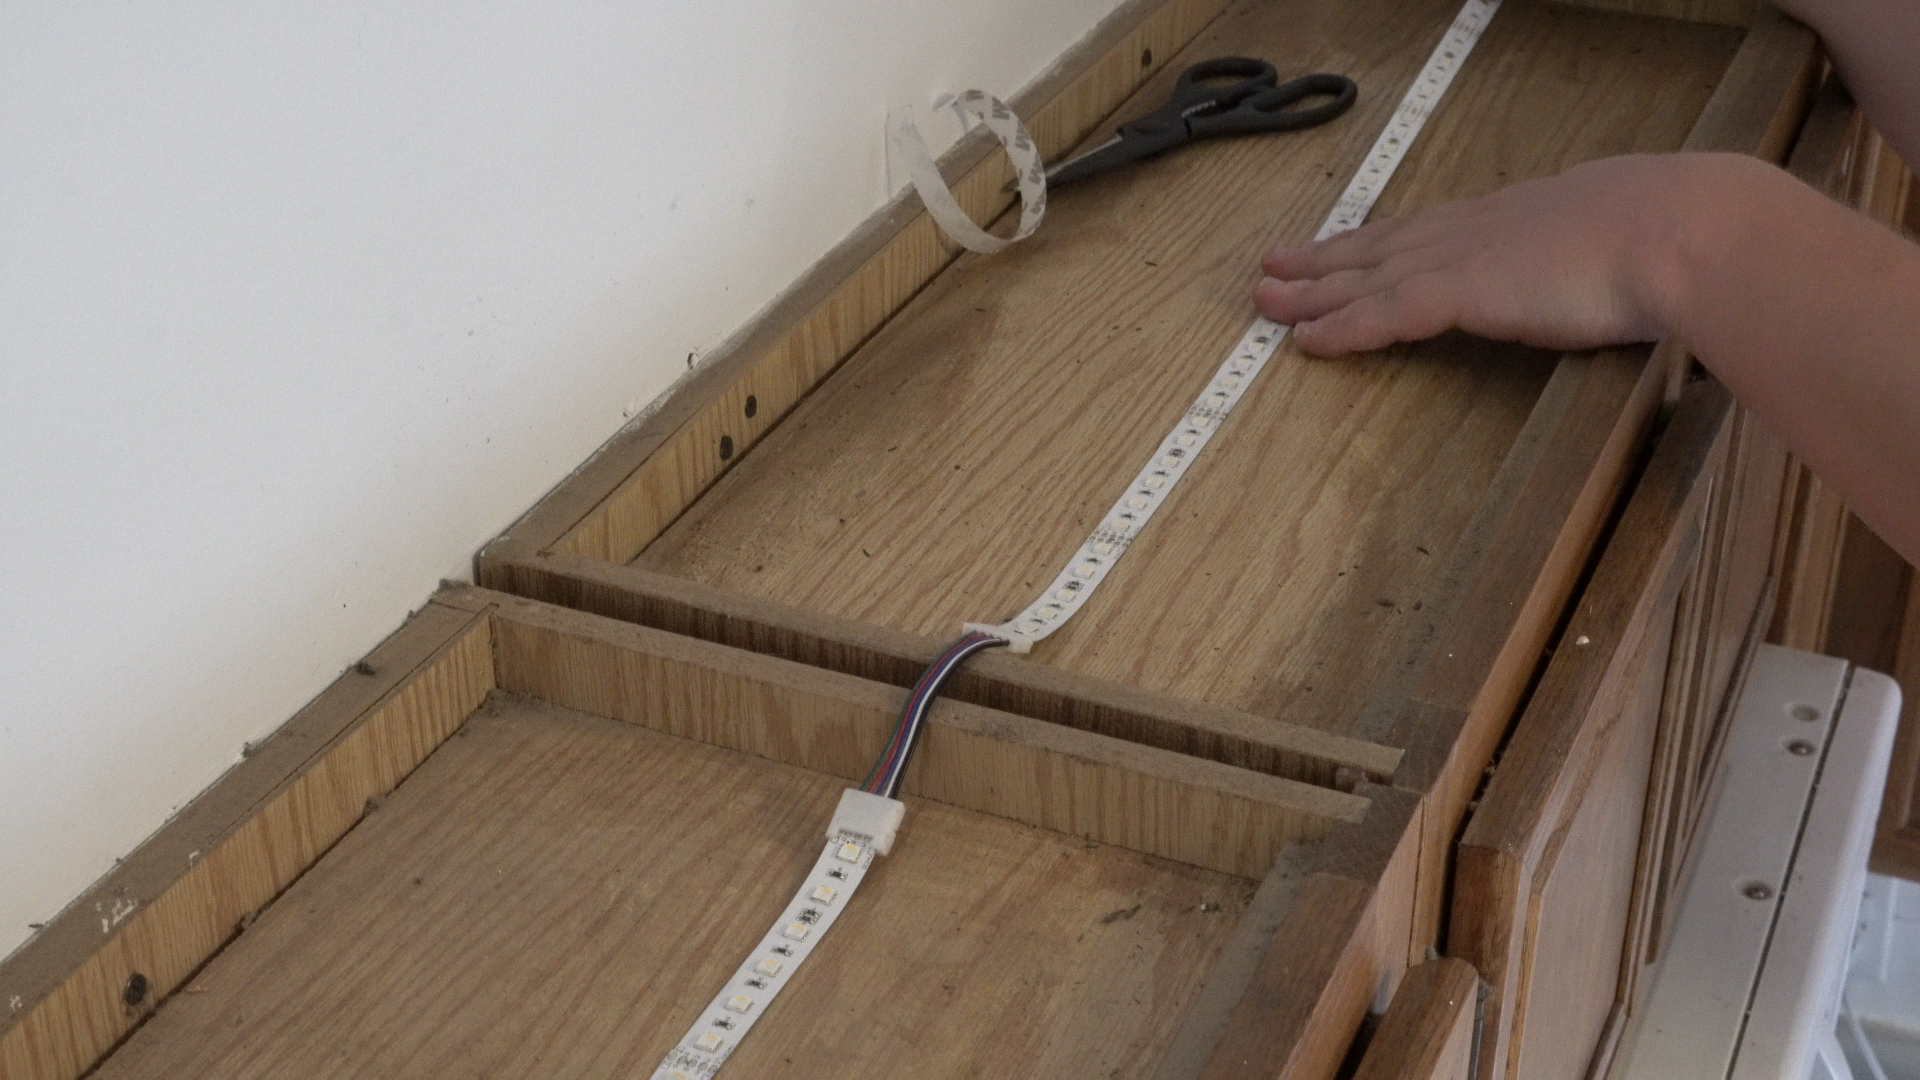 Above-Cabinet Lighting: How to Install LED Strip Lights - step 7